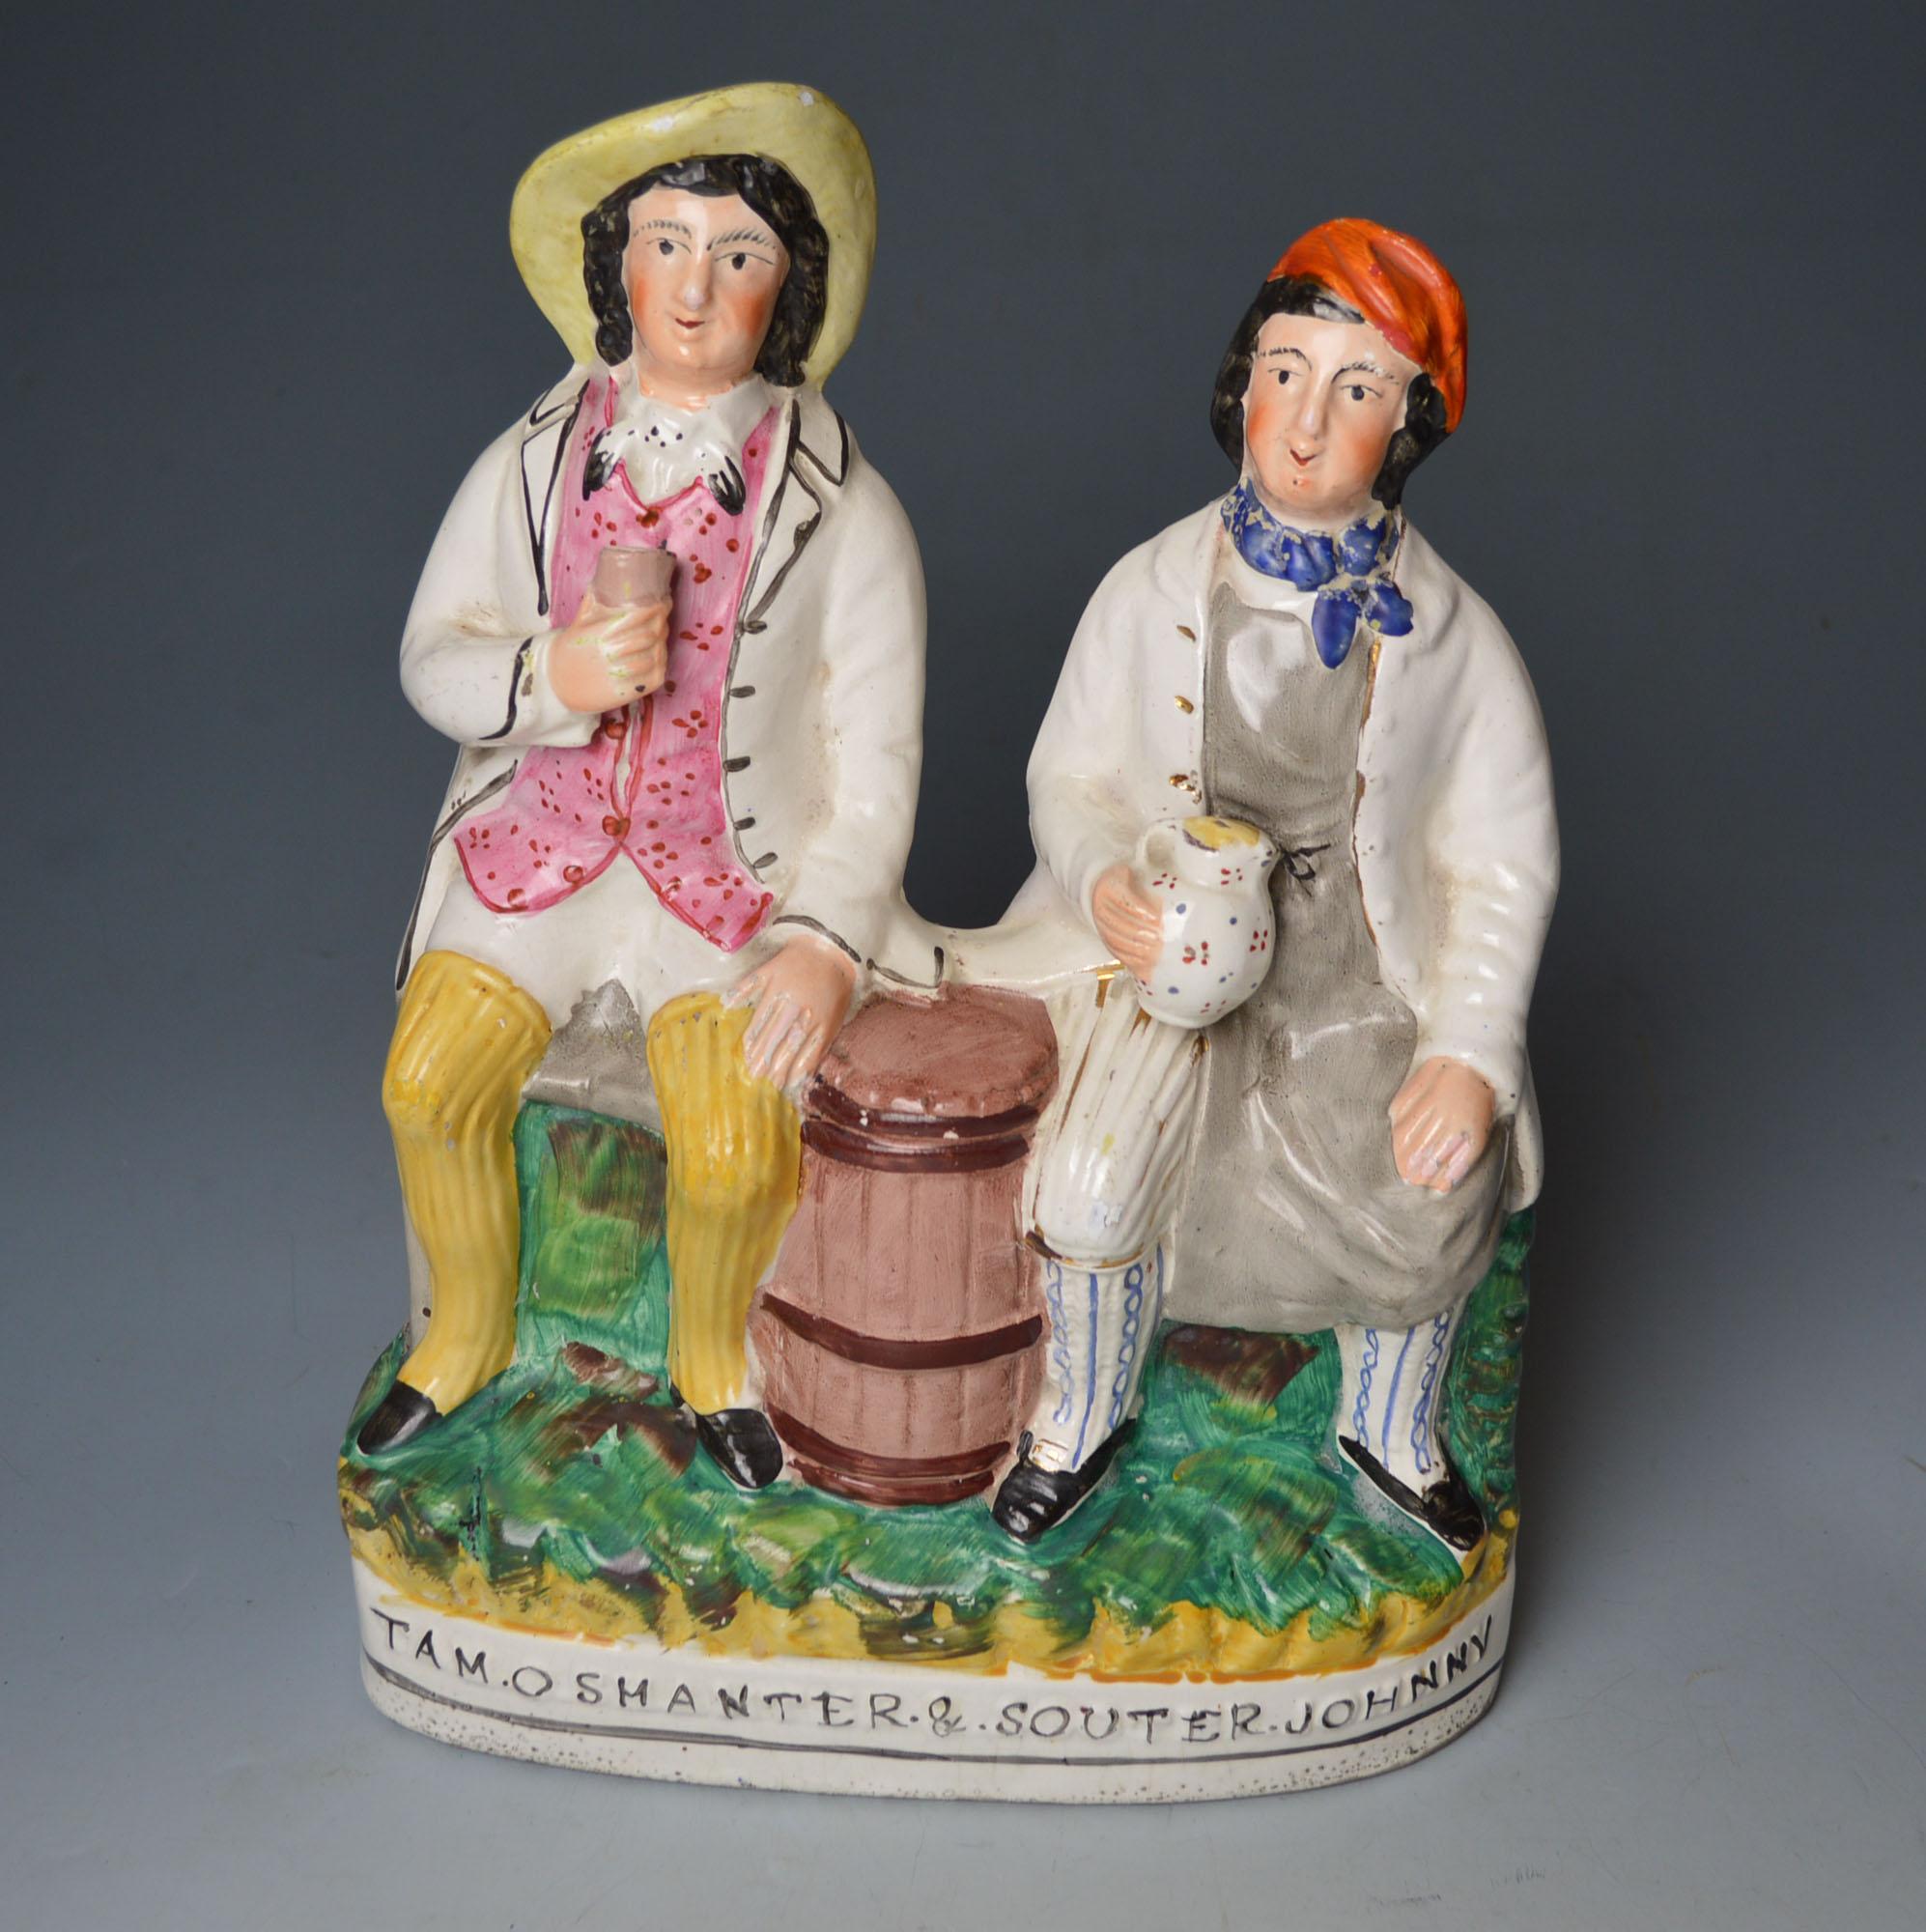 A charming large antique staffordshire flat back pottery double figure of Tam O`Shanter and Souter Johnny from the world famous poem by Robert Burns, 
Period Victorian: These figures were made from approximately 1850 till 1900 
Condition: good